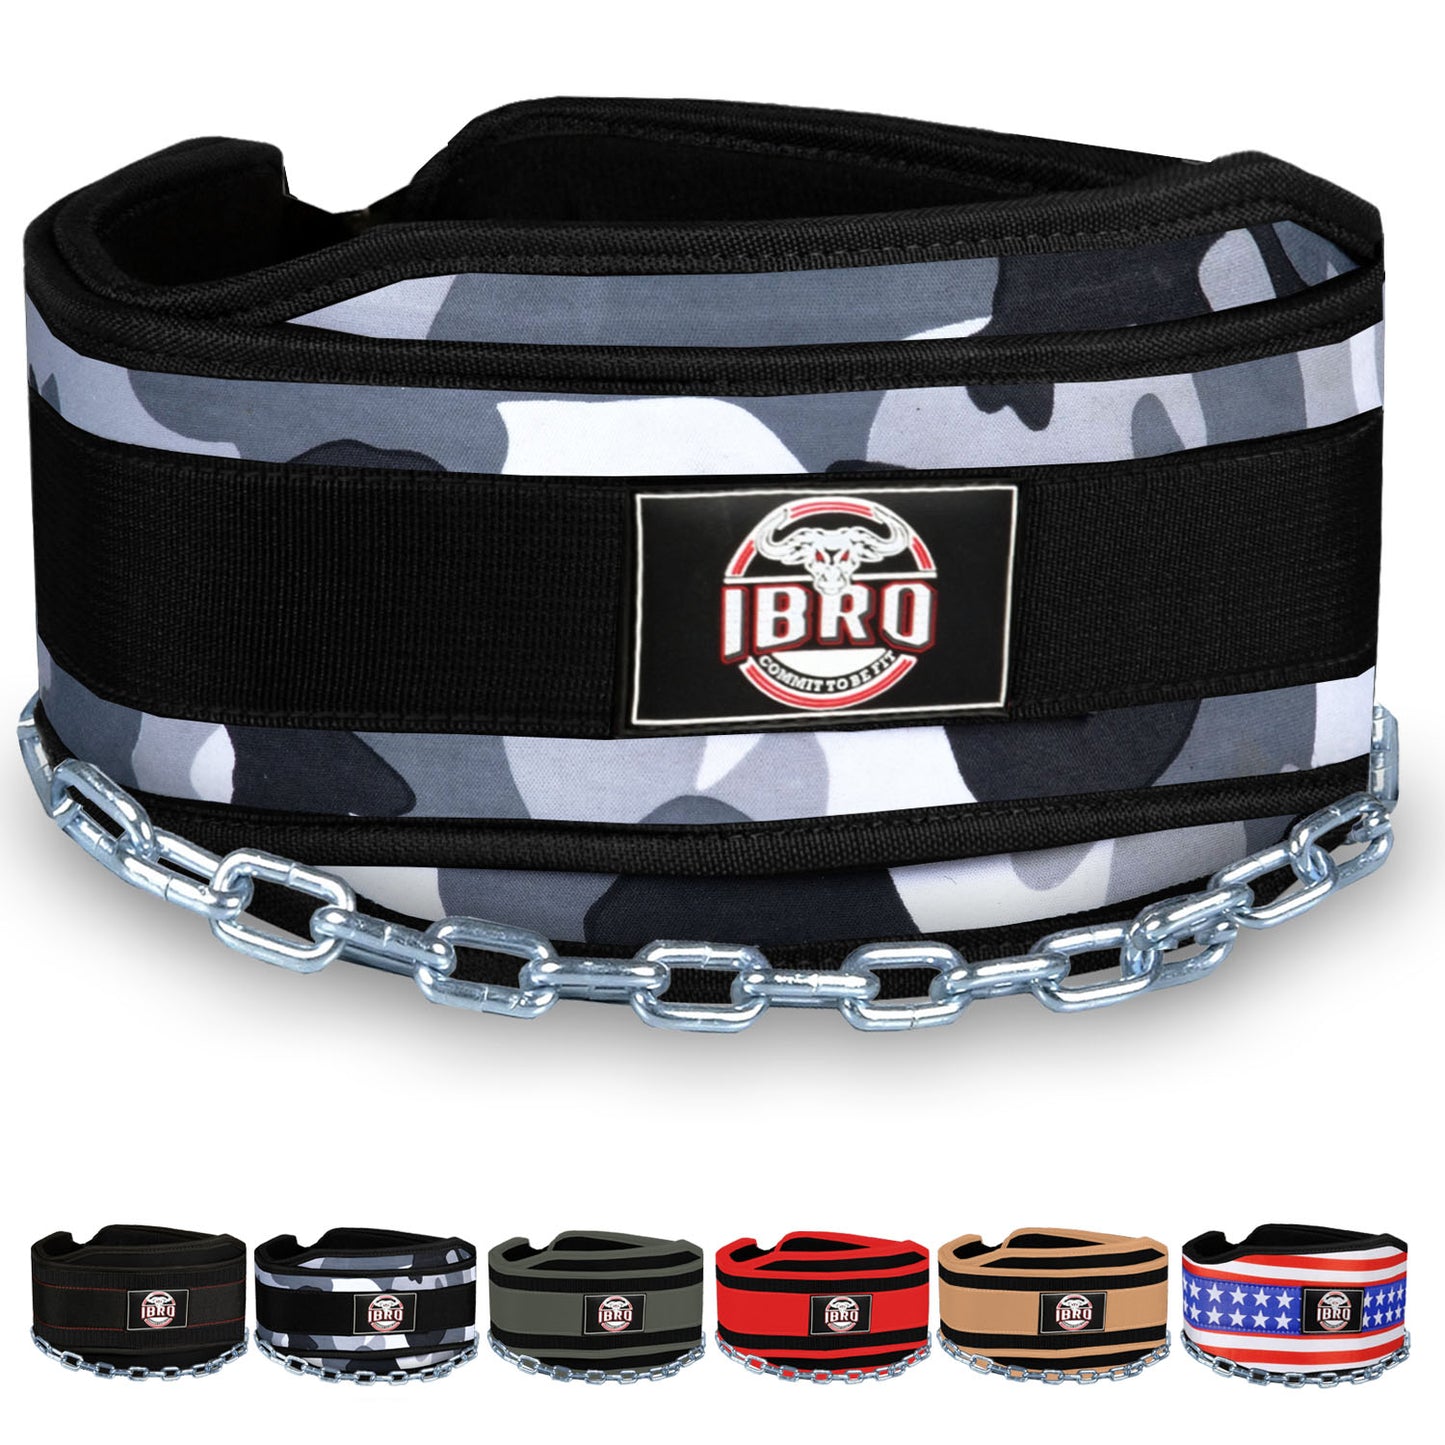 IBRO Advanced Fitness Dipping Belt with heavy Duty Long Steel Chain | Weighted Dips, Pullups, Bodybuilding, Weight Lifting | Neoprene Waist Support | for Men and Women Camo